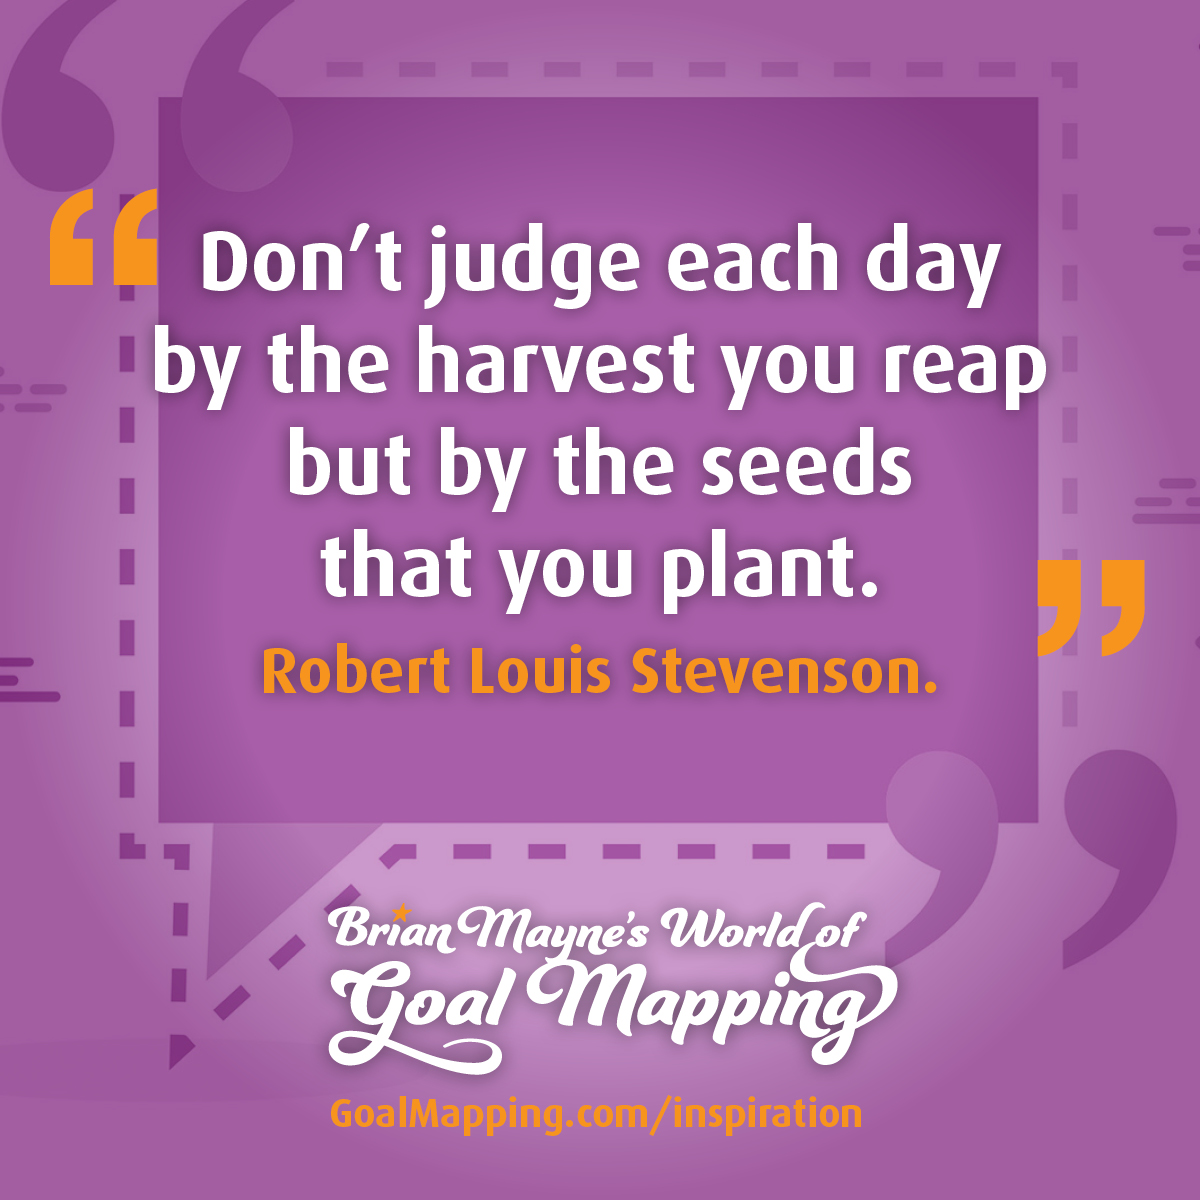 "Don’t judge each day by the harvest you reap but by the seeds that you plant." Robert Louis Stevenson